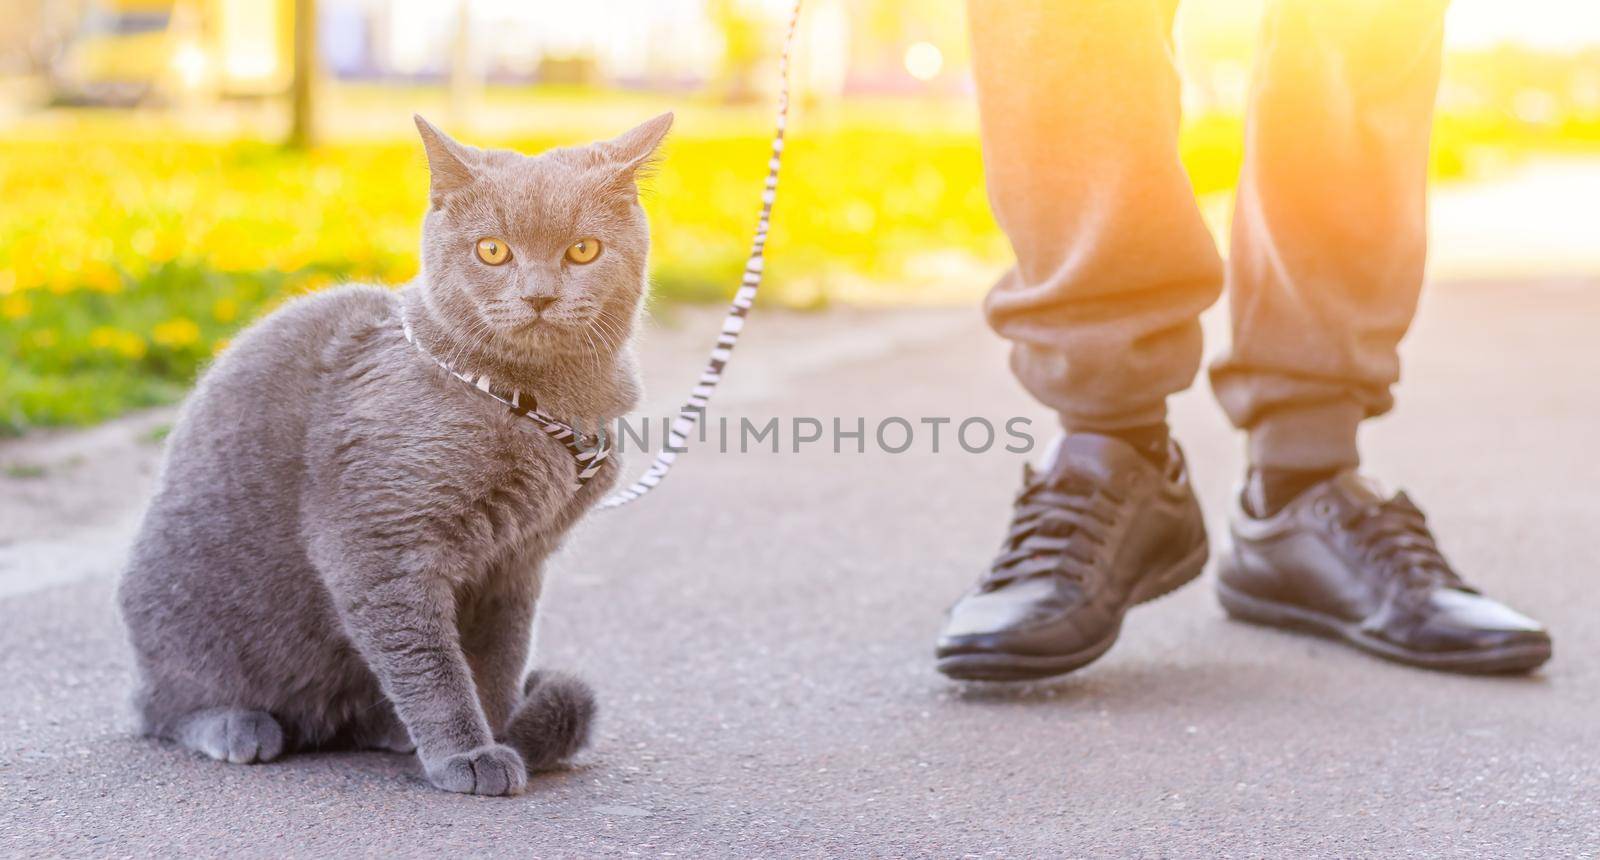 Walk the cat on the harness. Pet for a walk. Pet is afraid of the street. An article about walking cats. An article about the fear of street pets. British breed cat. The cat is sitting on the pavement. Walking the animal during the coronavirus. Walk in the fresh air